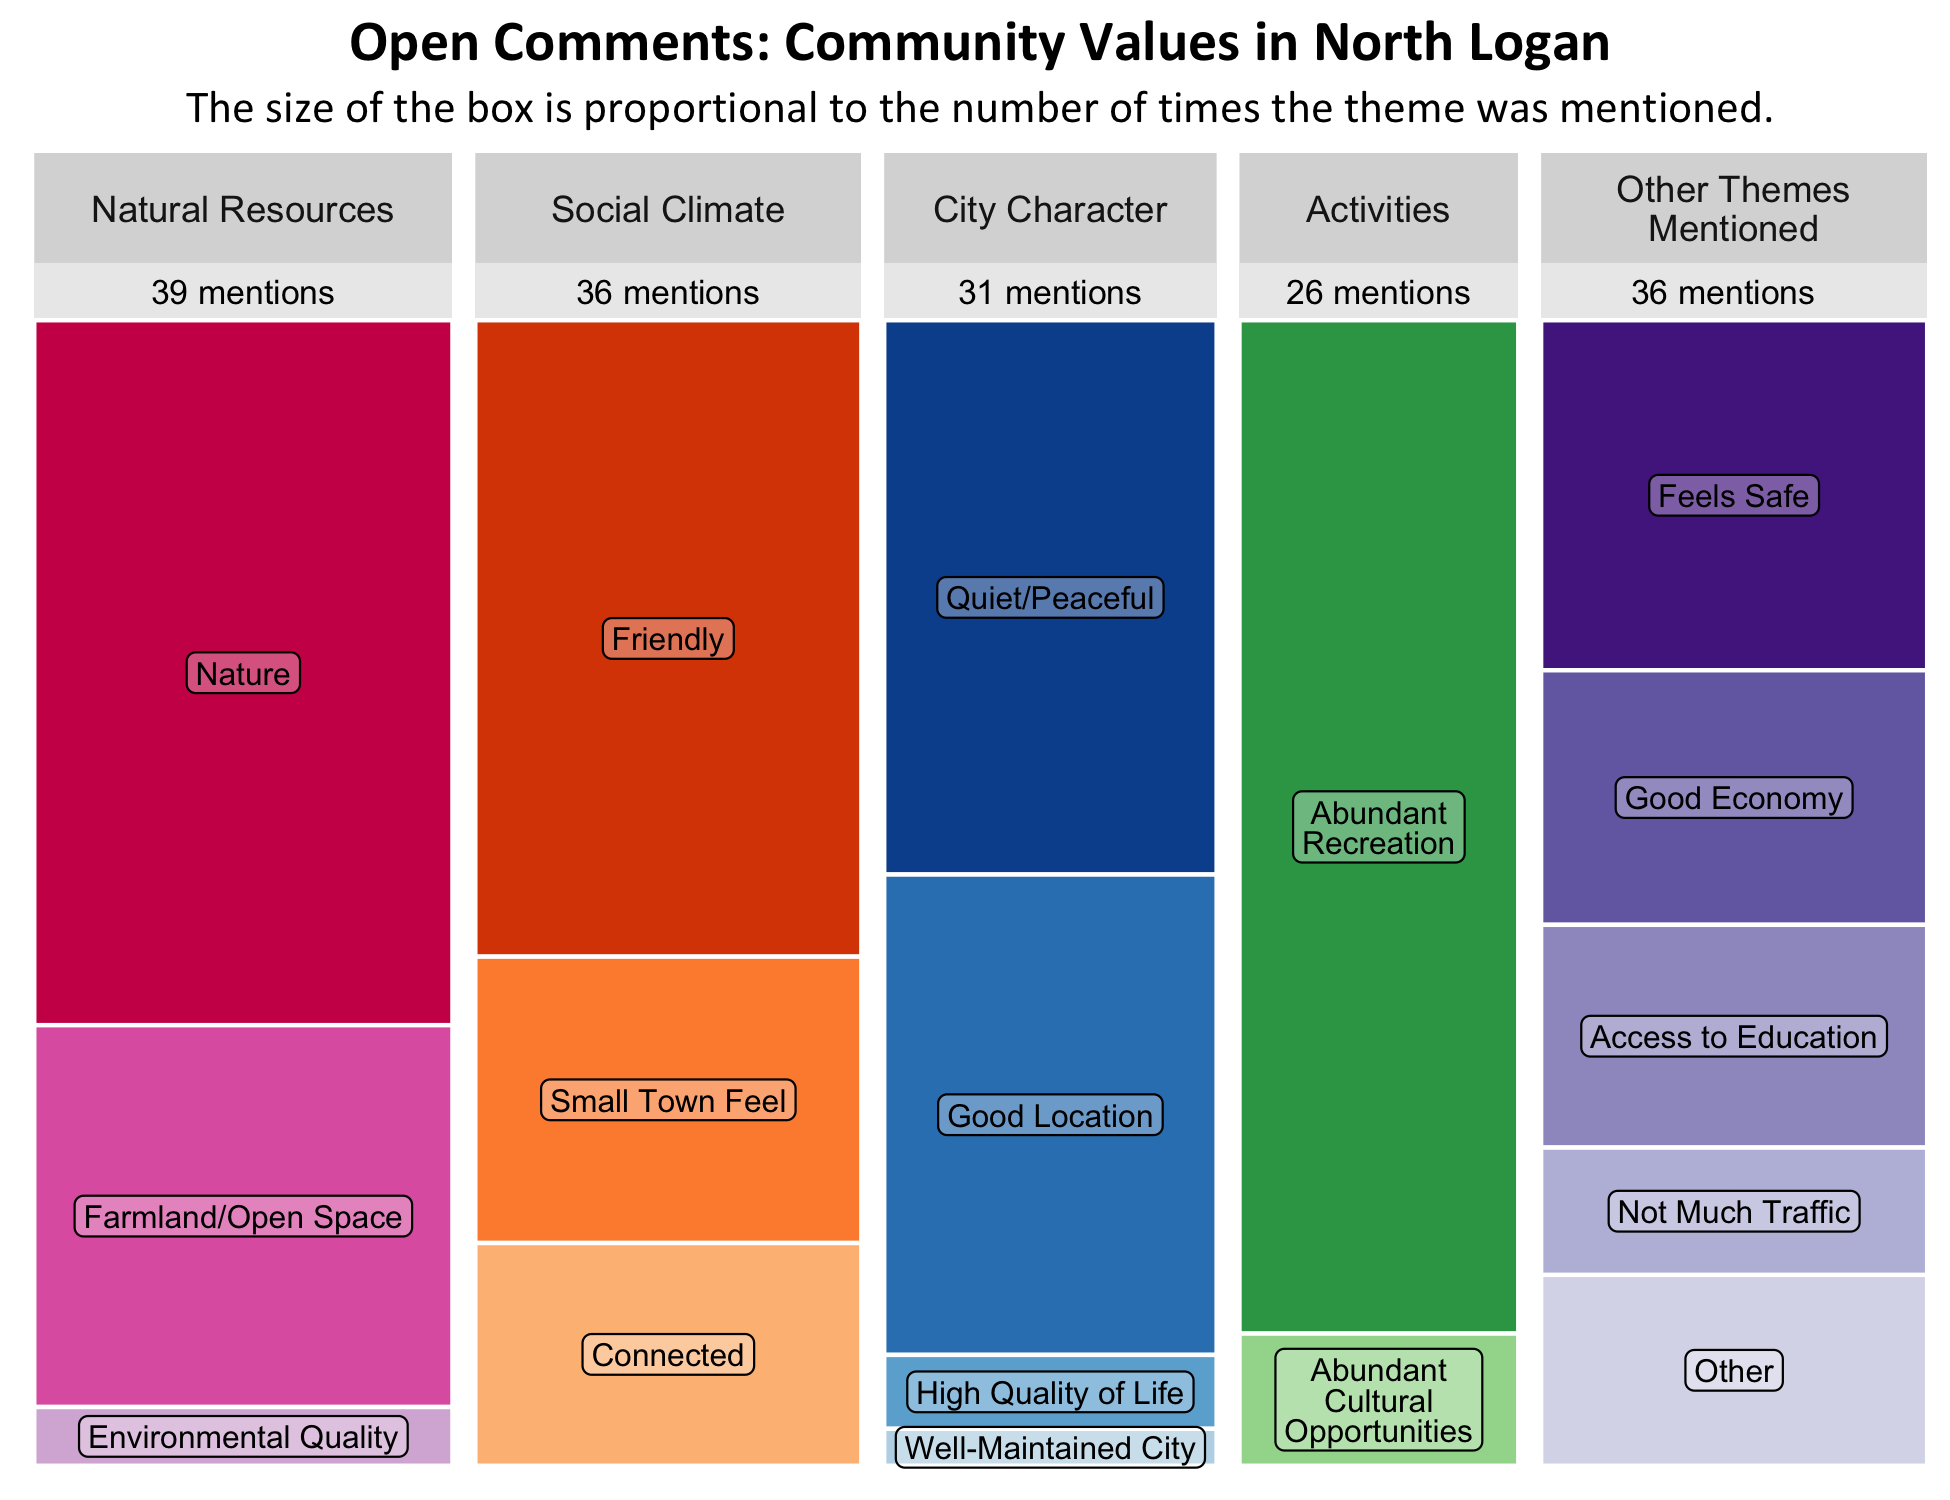 Type: Treemap Chart. Title: Open Comments: Community Values in North Logan. Subtitle: The size of the box is proportional to the number of times the theme was mentioned. Data –; Category: Social Climate- 36 mentions, boxes largest to smallest include Friendly, Small Town Feel, connected; Category: Natural Resources- 39 Mentions, boxes largest to smallest include Nature, Farmland/Open Space, Environmental Quality. City Character- 31 mentions, boxes largest to smallest include Quiet/Peaceful, Good Location, High Quality of Life, Well Maintained City. Category: Activities- 26 Mentions, boxes largest to smallest includes Abundant Recreation, Abundant Cultural Opportunities, Likes Tourism, Good Parks. Category: Other Themes Mentioned- 36 mentions, boxes largest to smallest Includes Feels Safe, Good Economy, Access to Education, Not Much Traffic, Other.  